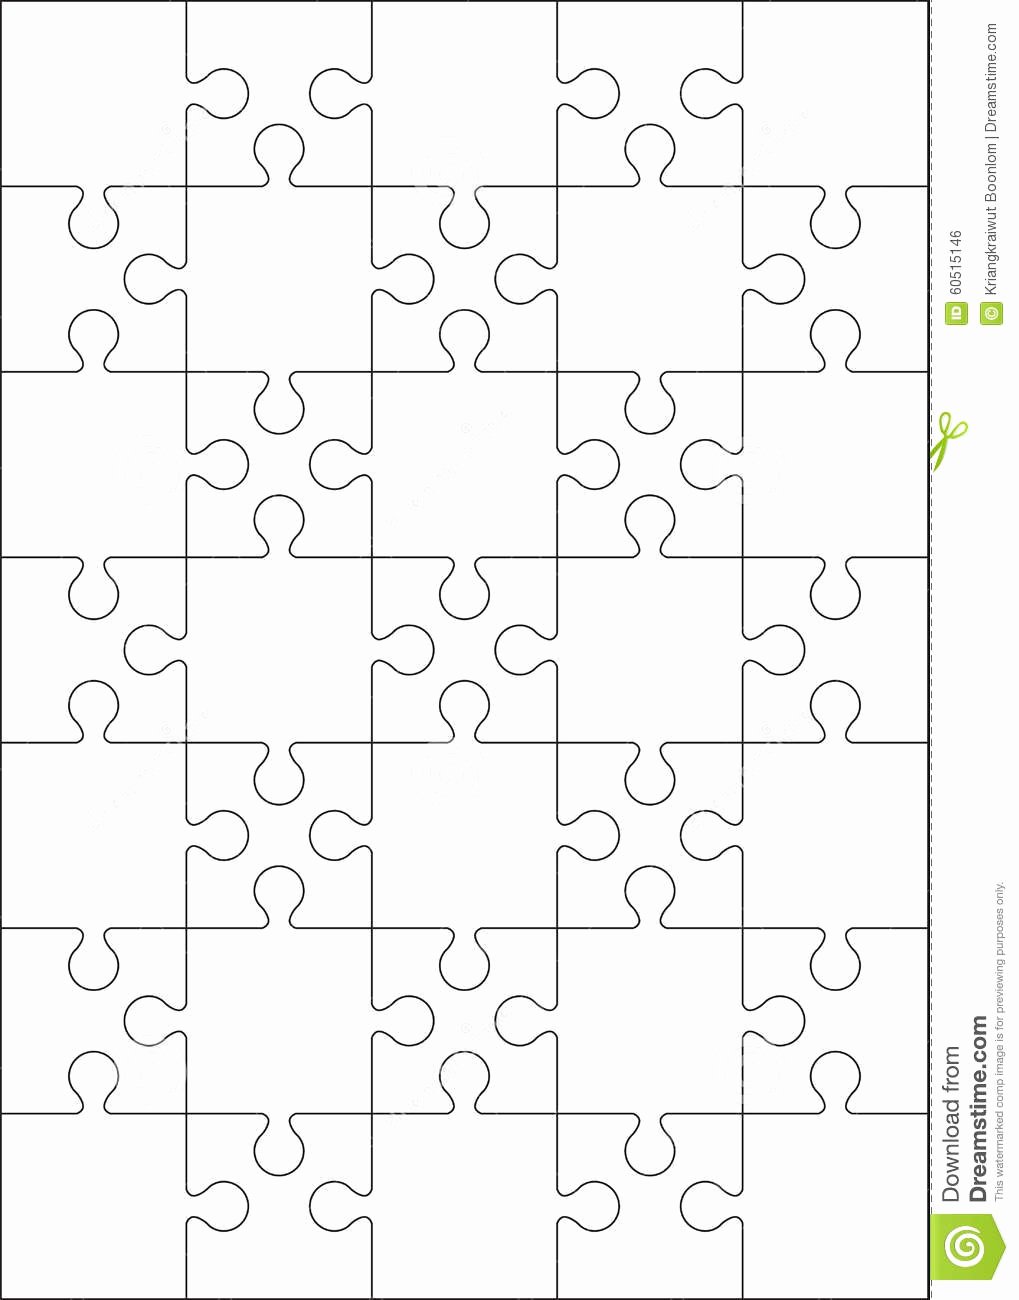 Blank Jigsaw Puzzle Template Elegant 35 Jigsaw Puzzle Blank Template Cutting Guidelines